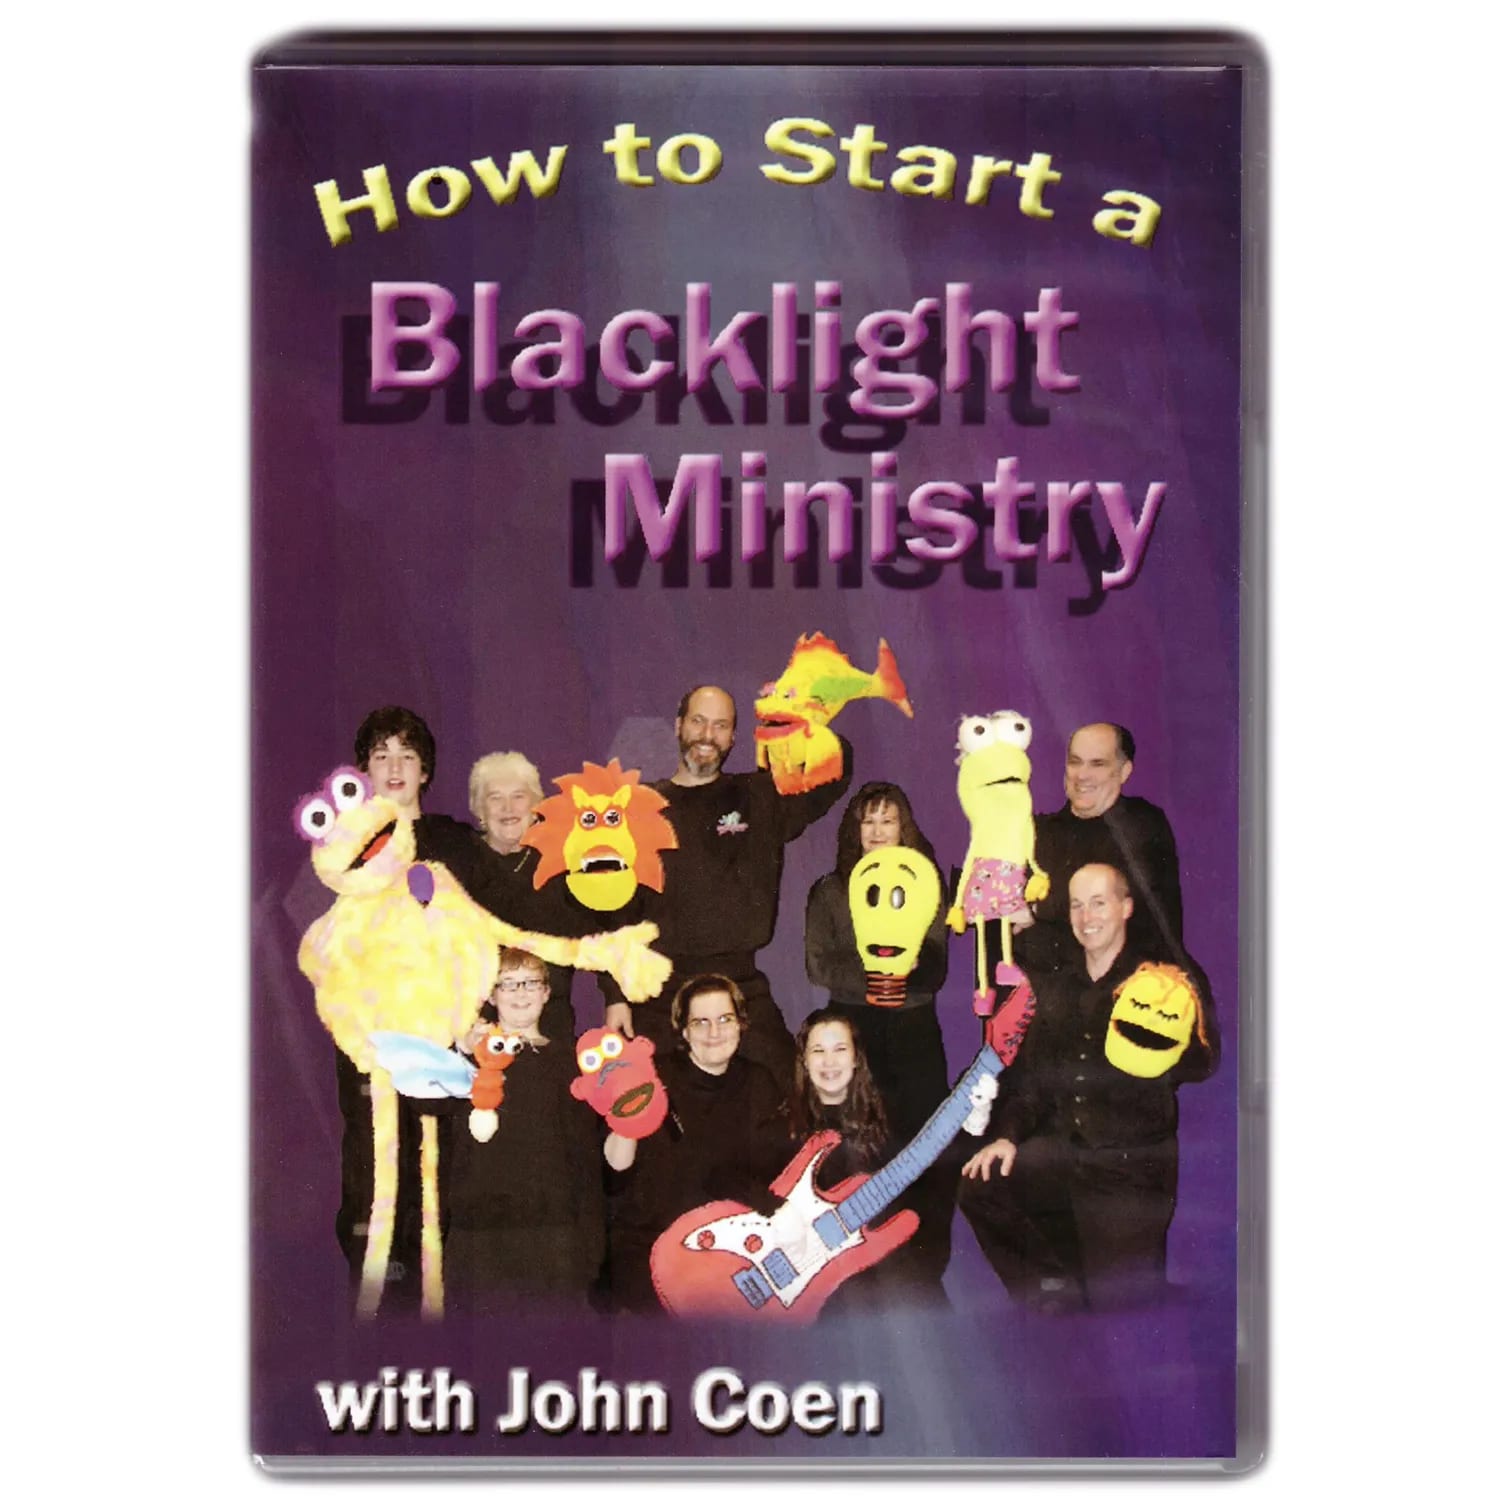 How to Start a Blacklight Ministry DVD